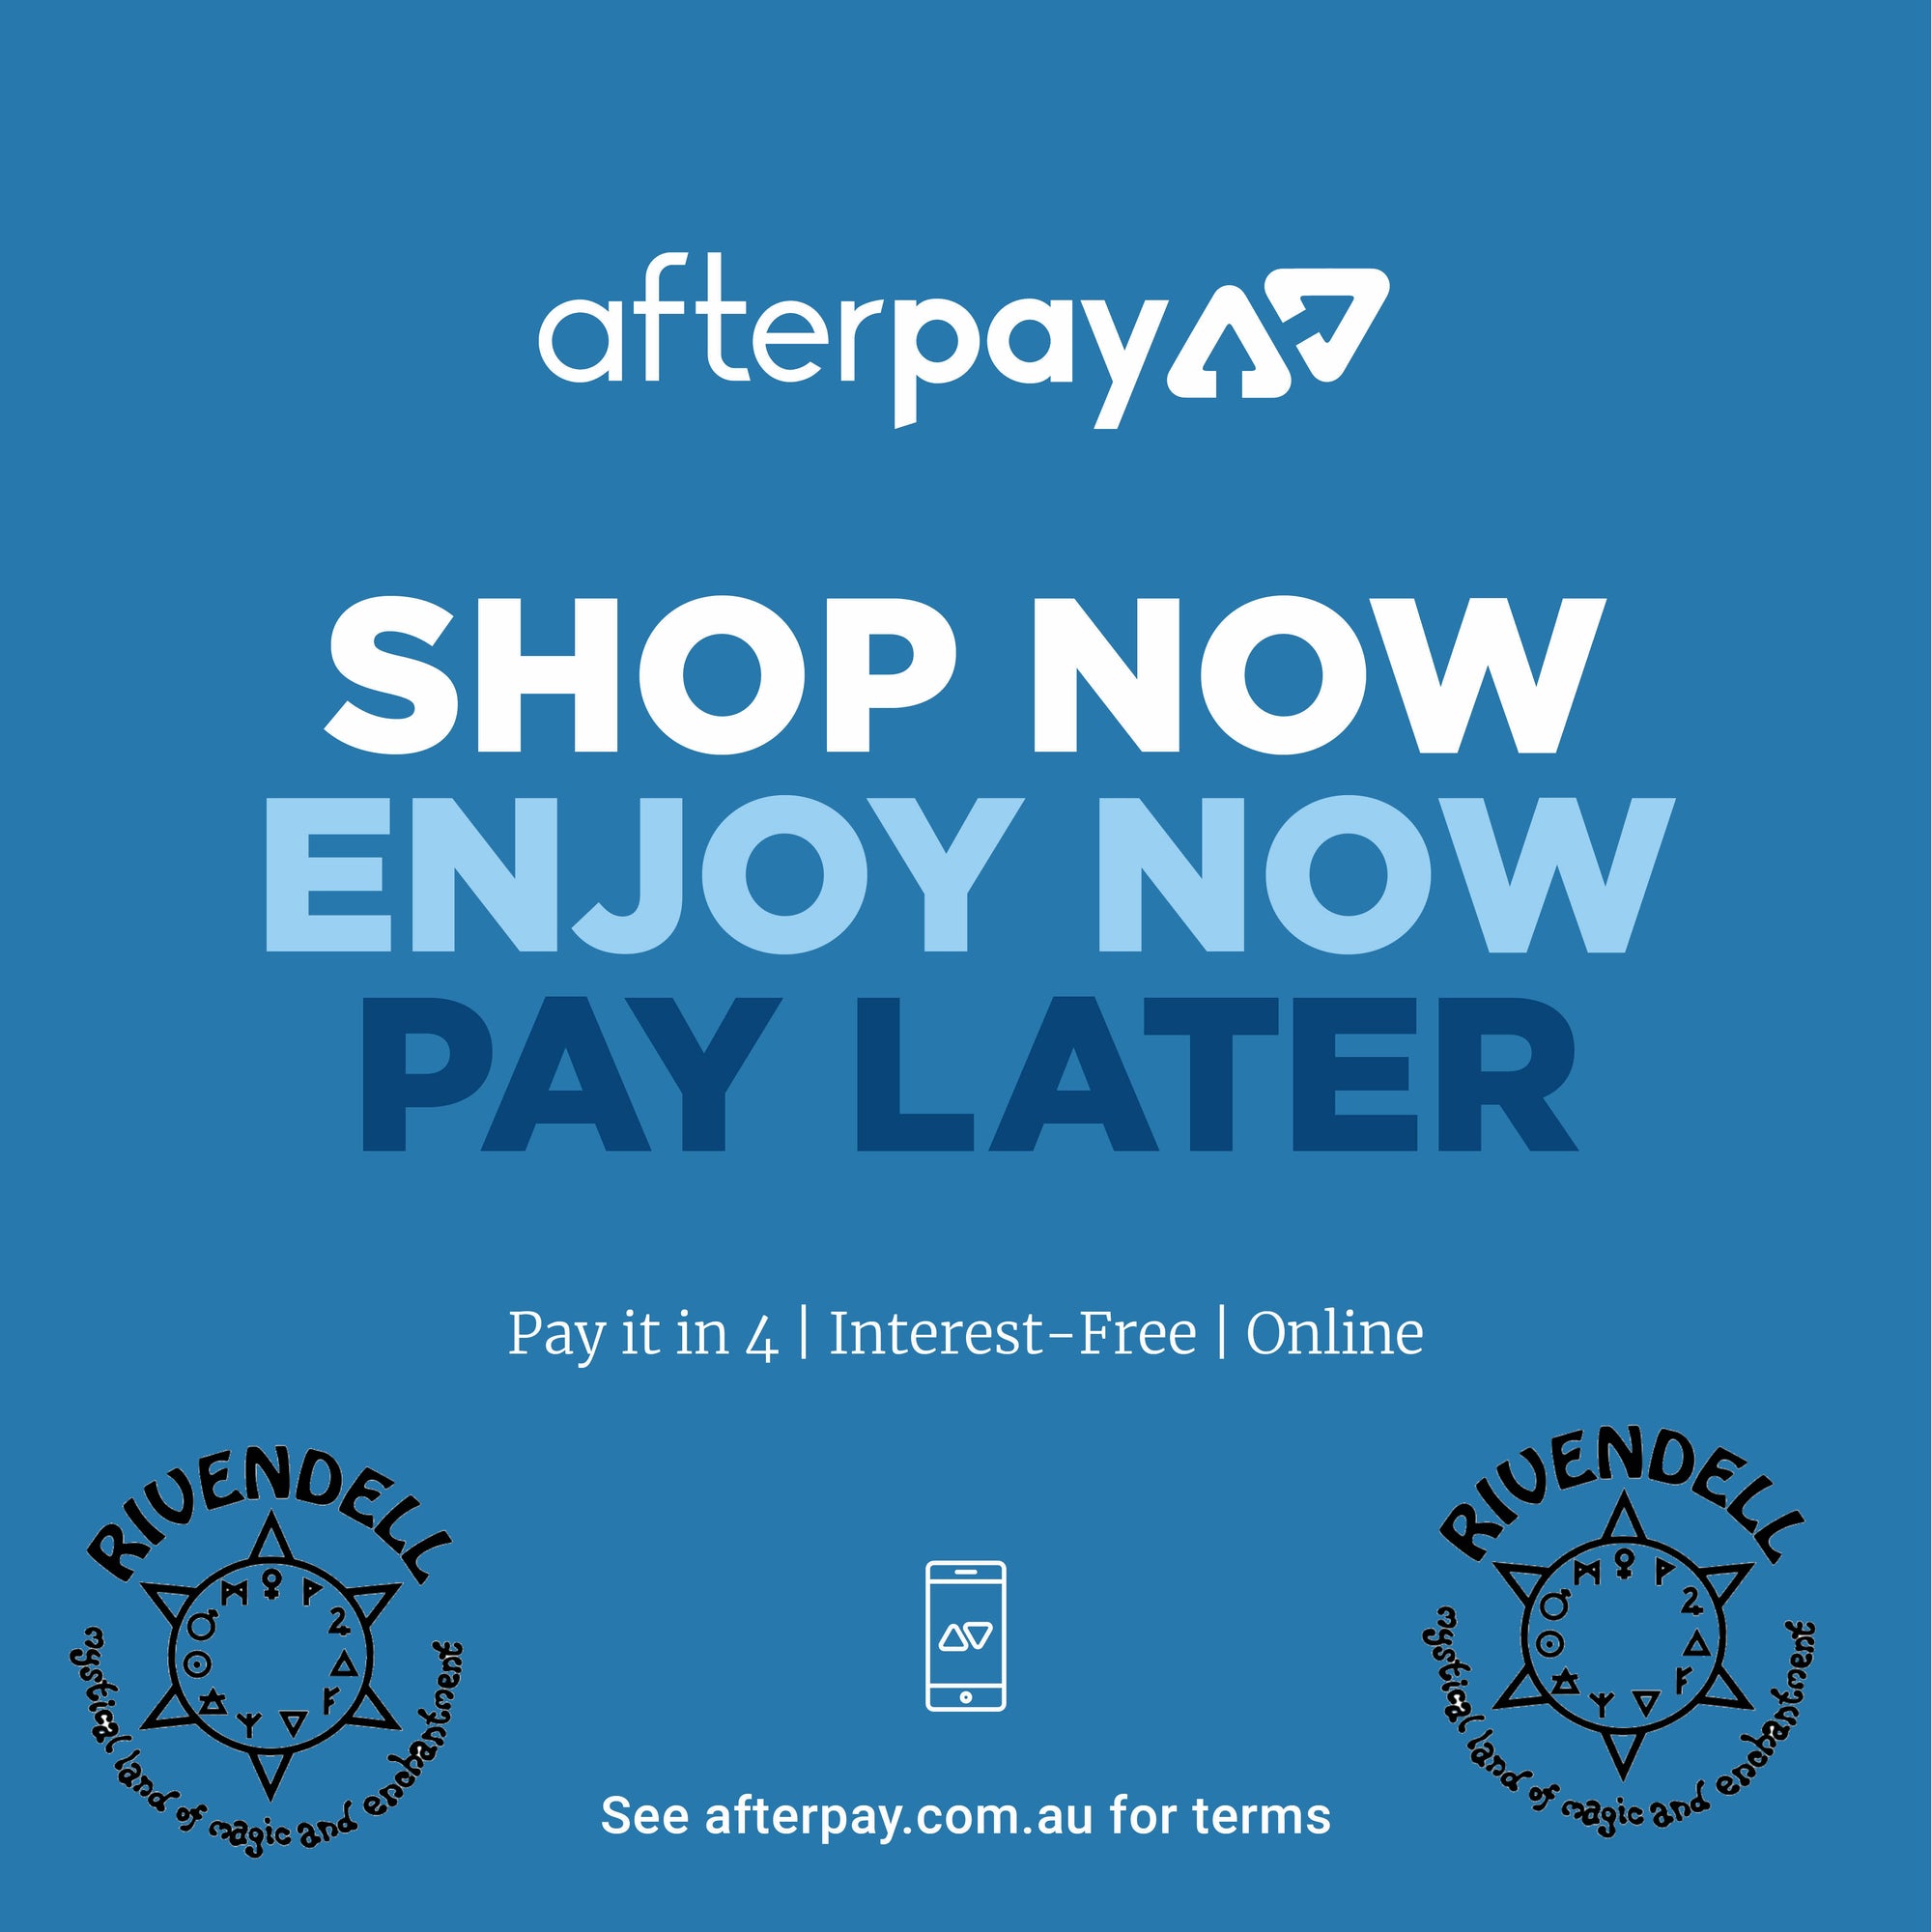 Huge new we're now accepting AfterPay!